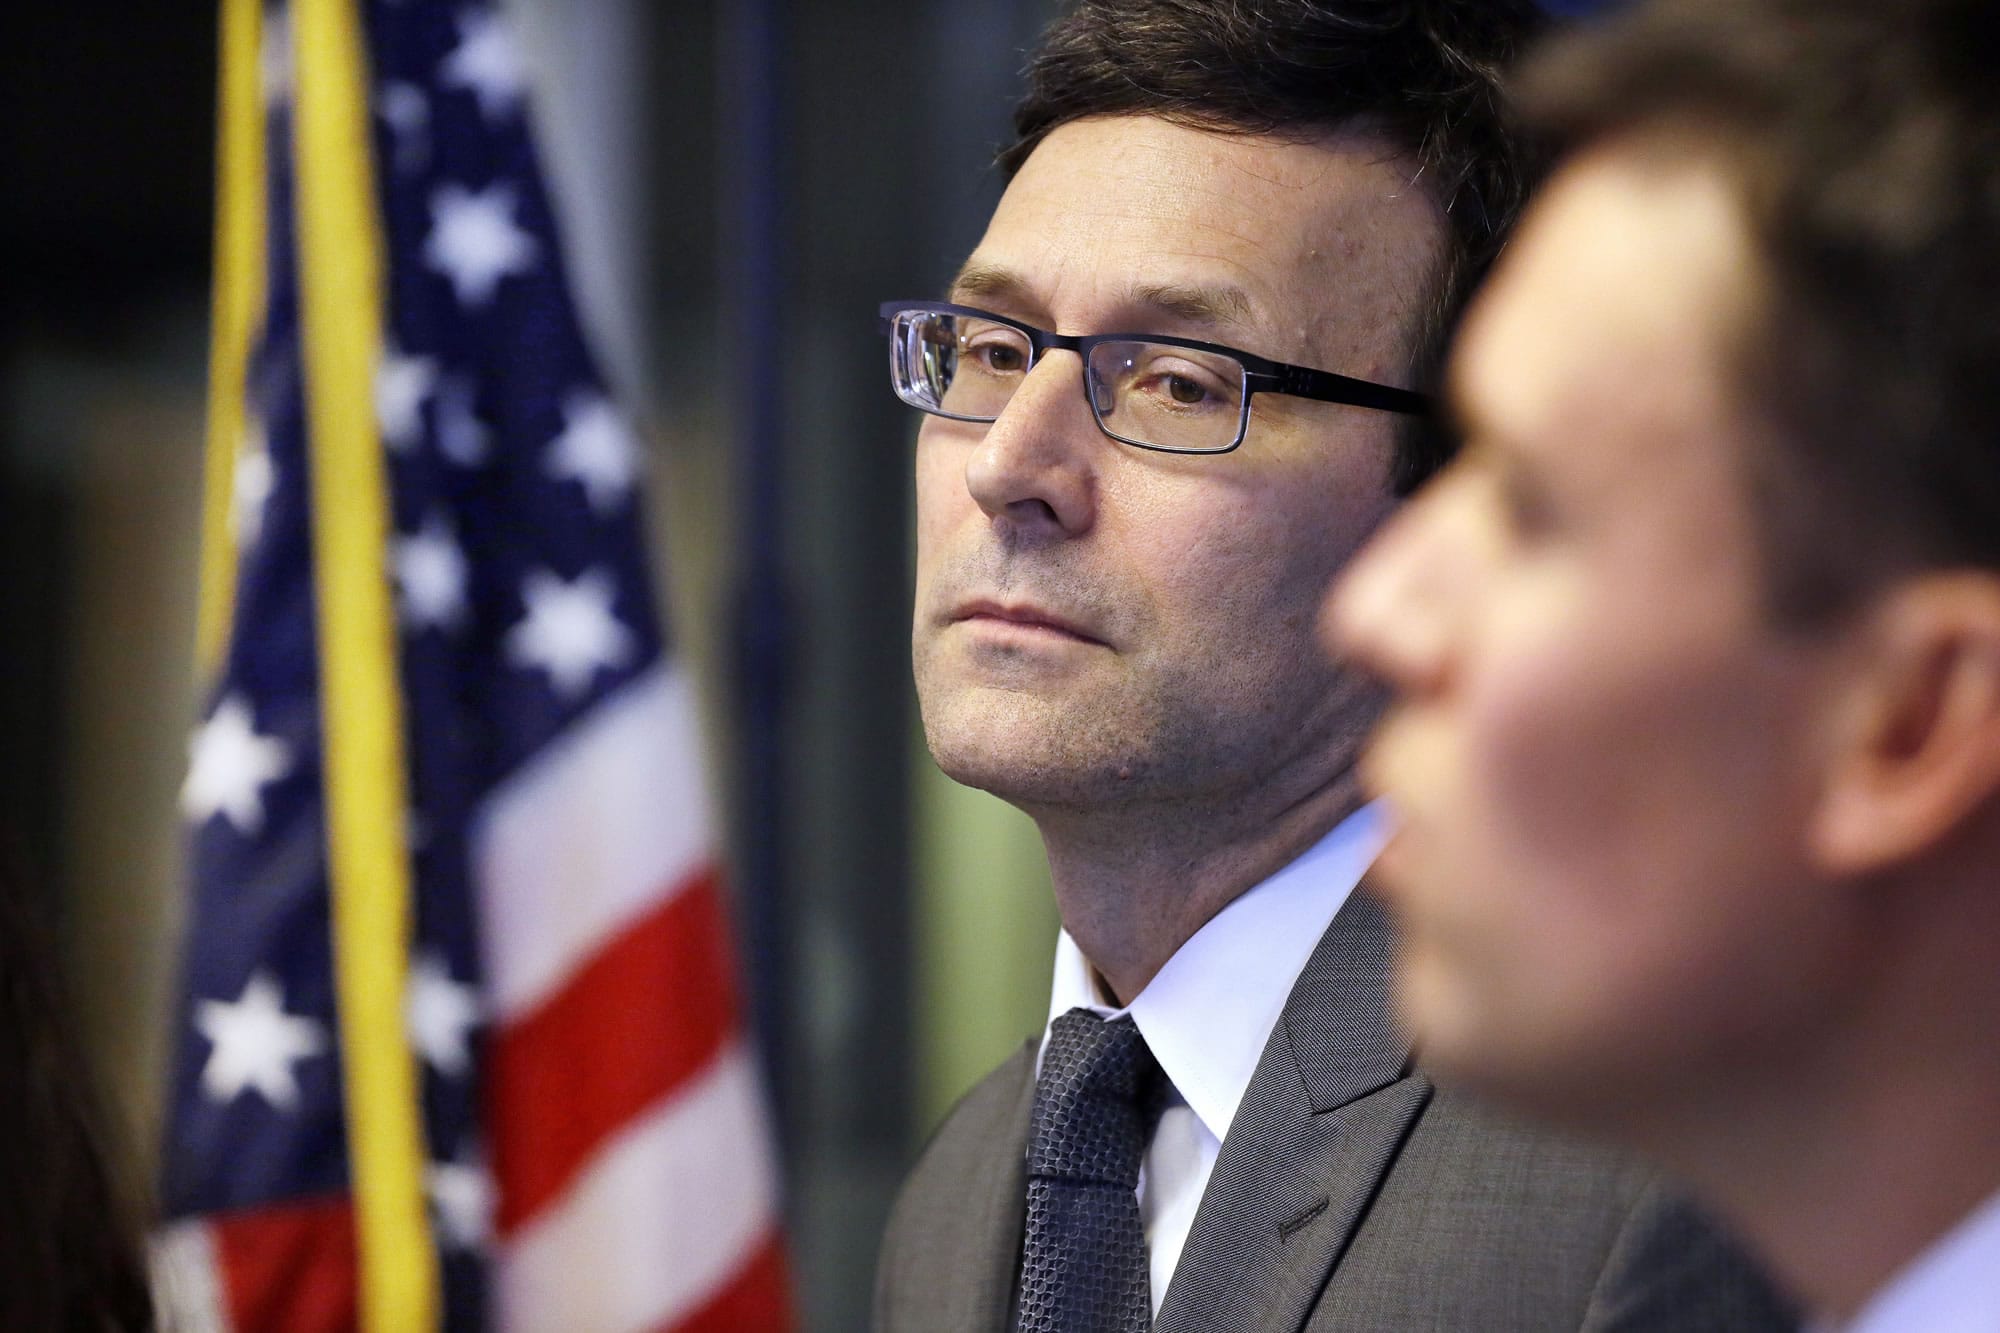 Washington State Attorney General Bob Ferguson listens to a question at a news conference the state's response to President Trump's revised travel ban Thursday, March 9, 2017, in Seattle. Legal challenges against Trump's revised travel ban mounted Thursday as Washington state said it would renew its request to block the executive order. It came a day after Hawaii launched its own lawsuit, and Ferguson said both Oregon and New York had asked to join his state's legal action.